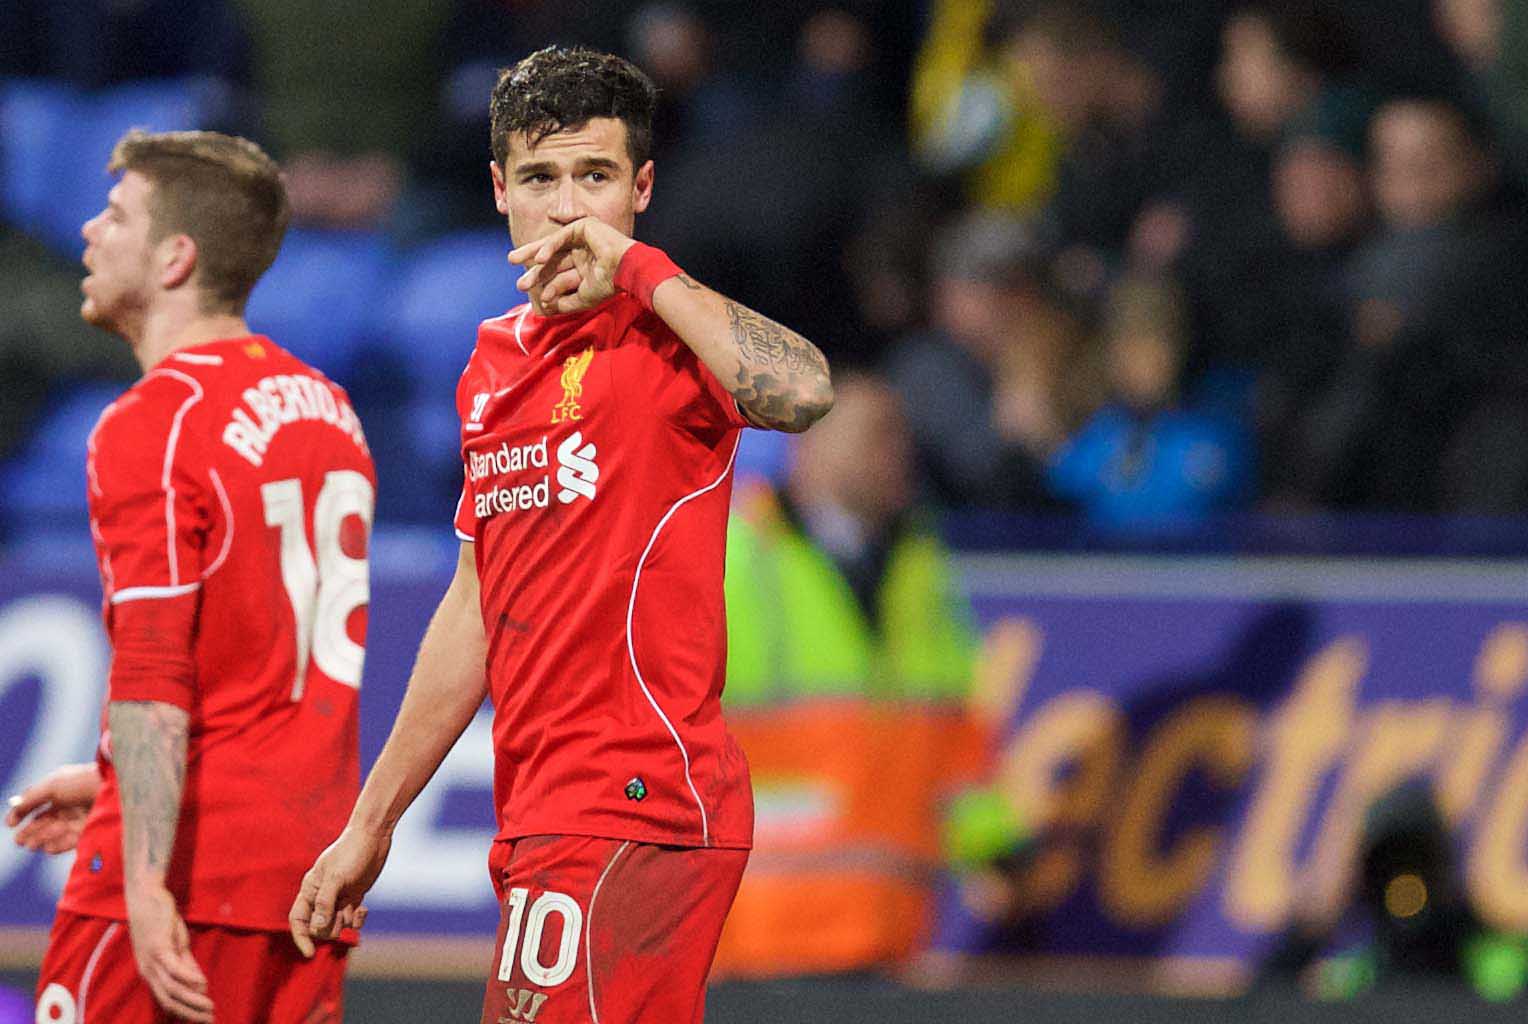 MATCH REVIEW: BOLTON 1 LIVERPOOL 2